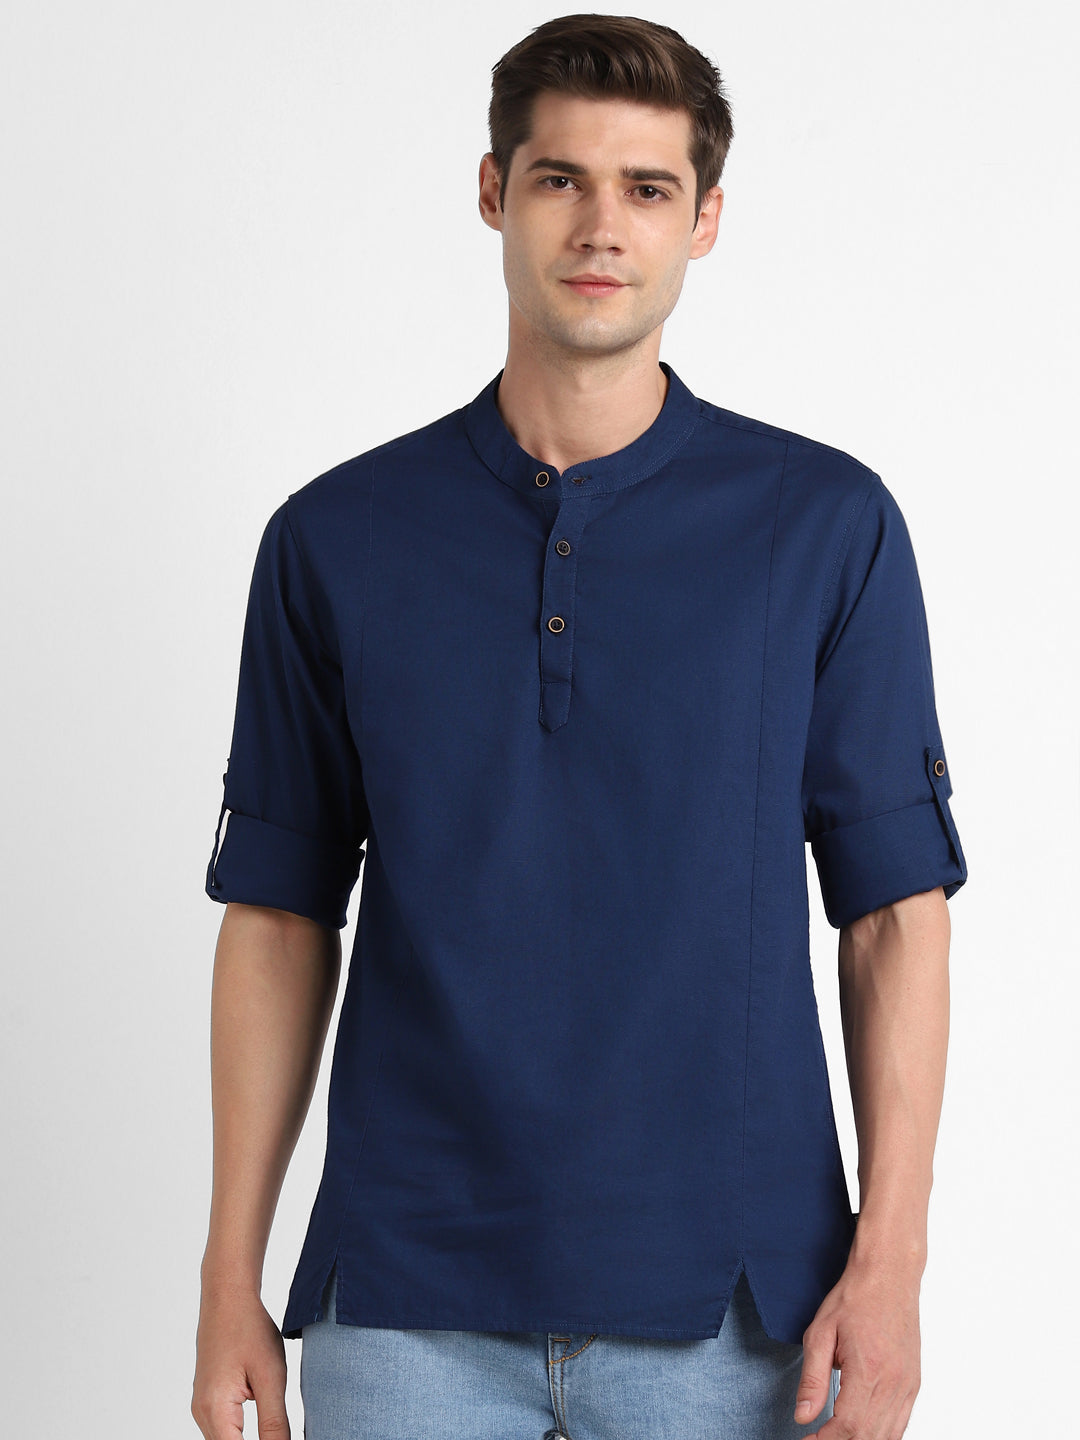 Men's Blue Cotton Full Sleeve Slim Fit Casual Solid Shirt